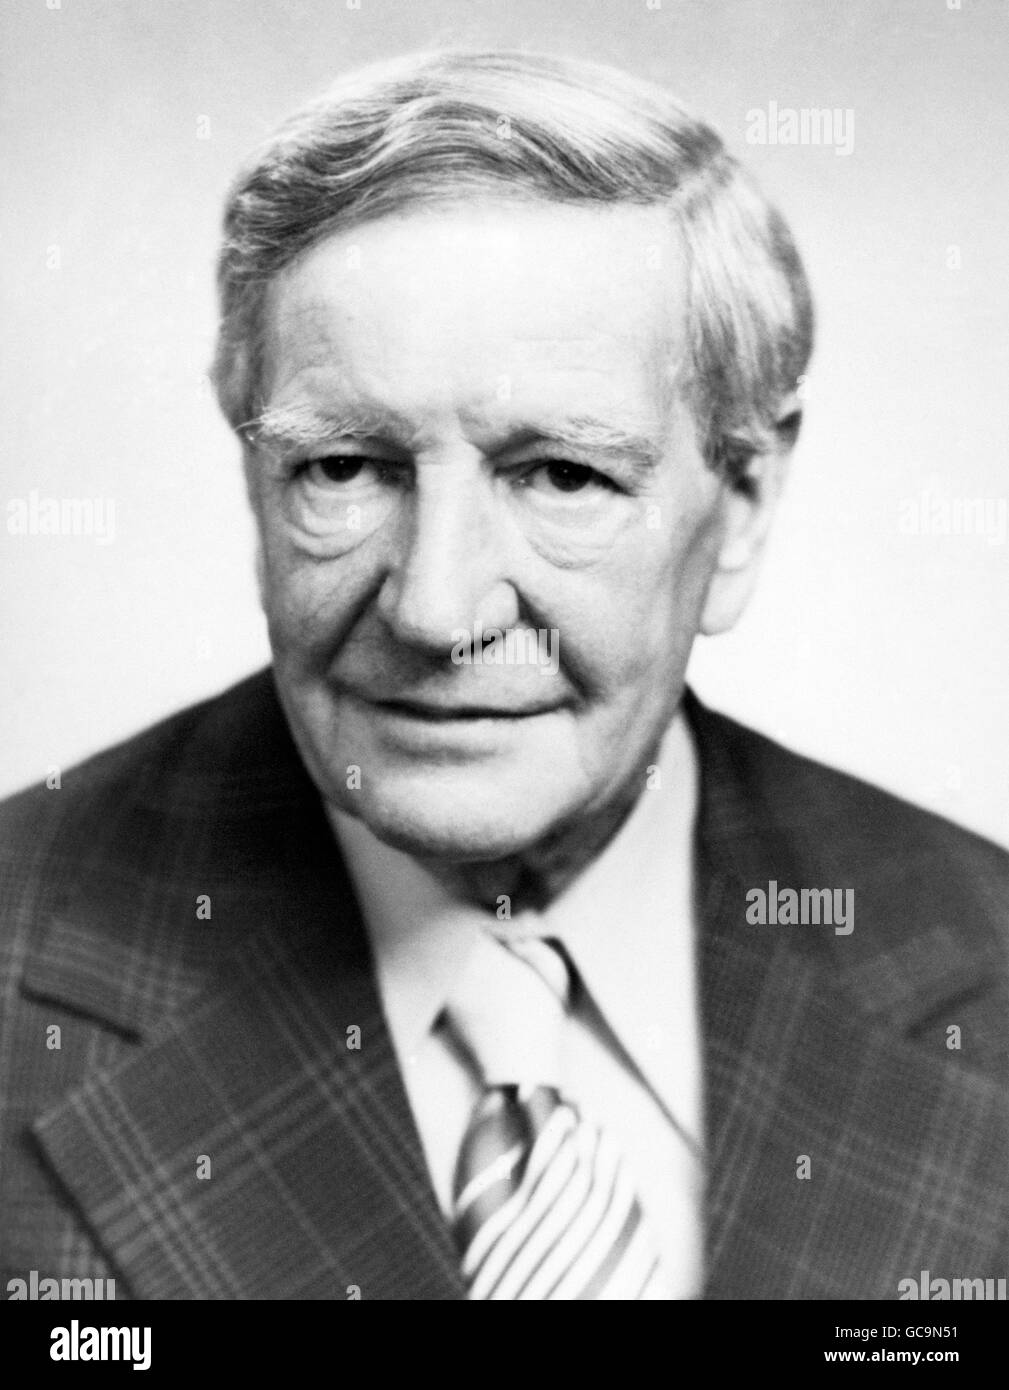 HAROLD RUSSELL 'KIM' PHILBY. AN ARCHIVE OF PERSONAL DOCUMENTS BELONGING TO THE KGB MASTERSPY IS TO BE AUCTIONED AT SOTHEBY'S IN A SALE OF ENGLISH LITERATURE AND HISTORY. Stock Photo